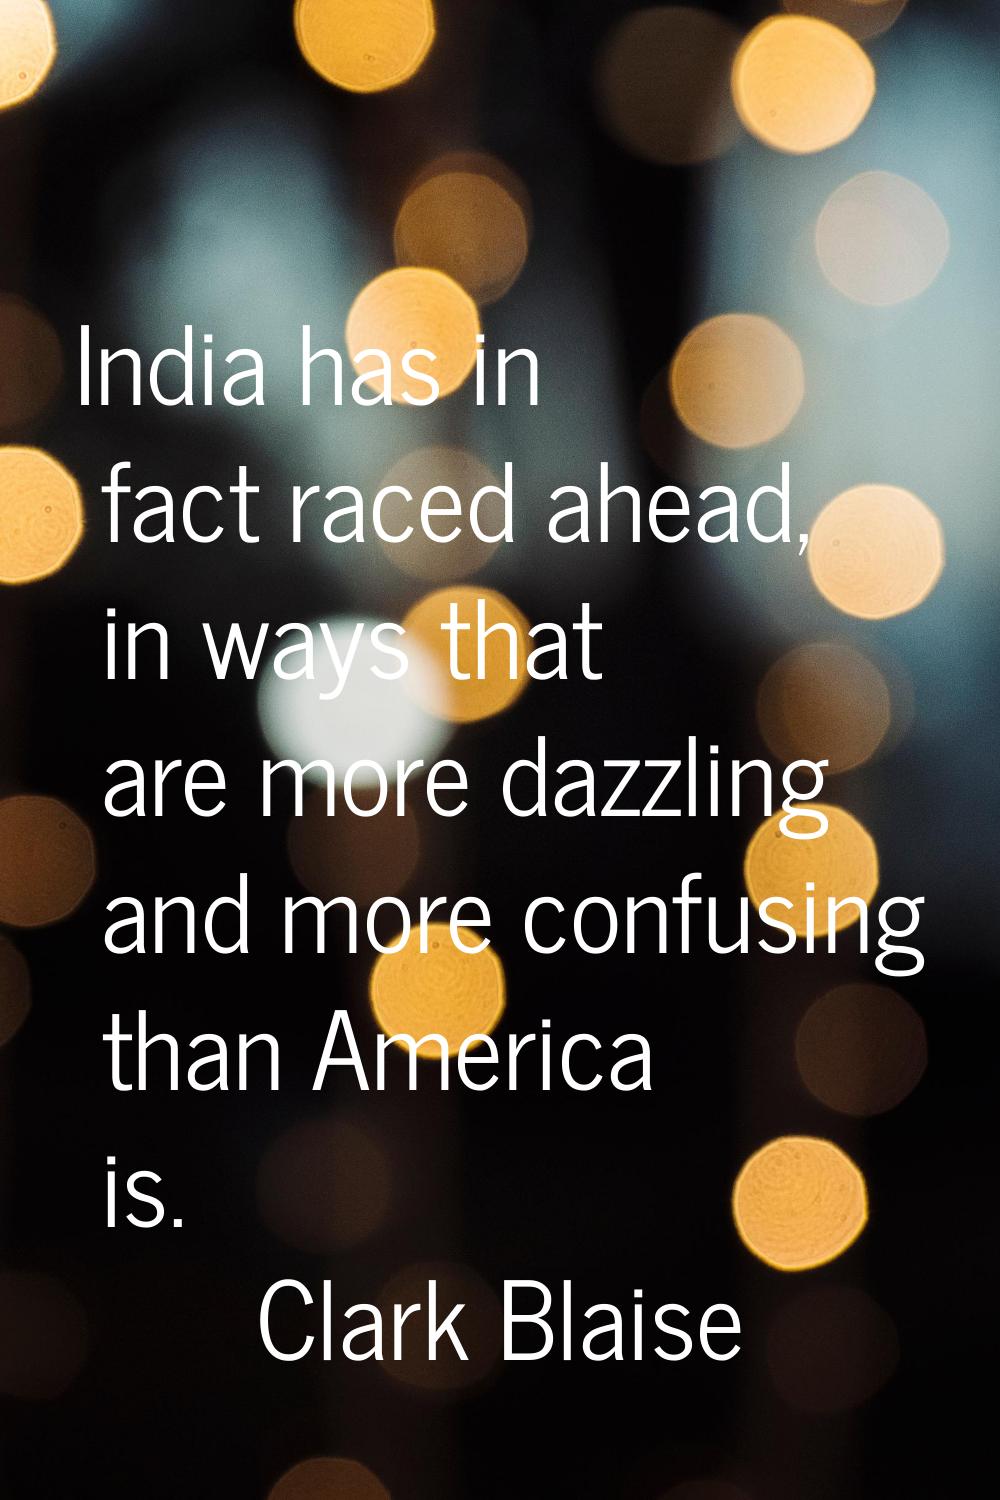 India has in fact raced ahead, in ways that are more dazzling and more confusing than America is.